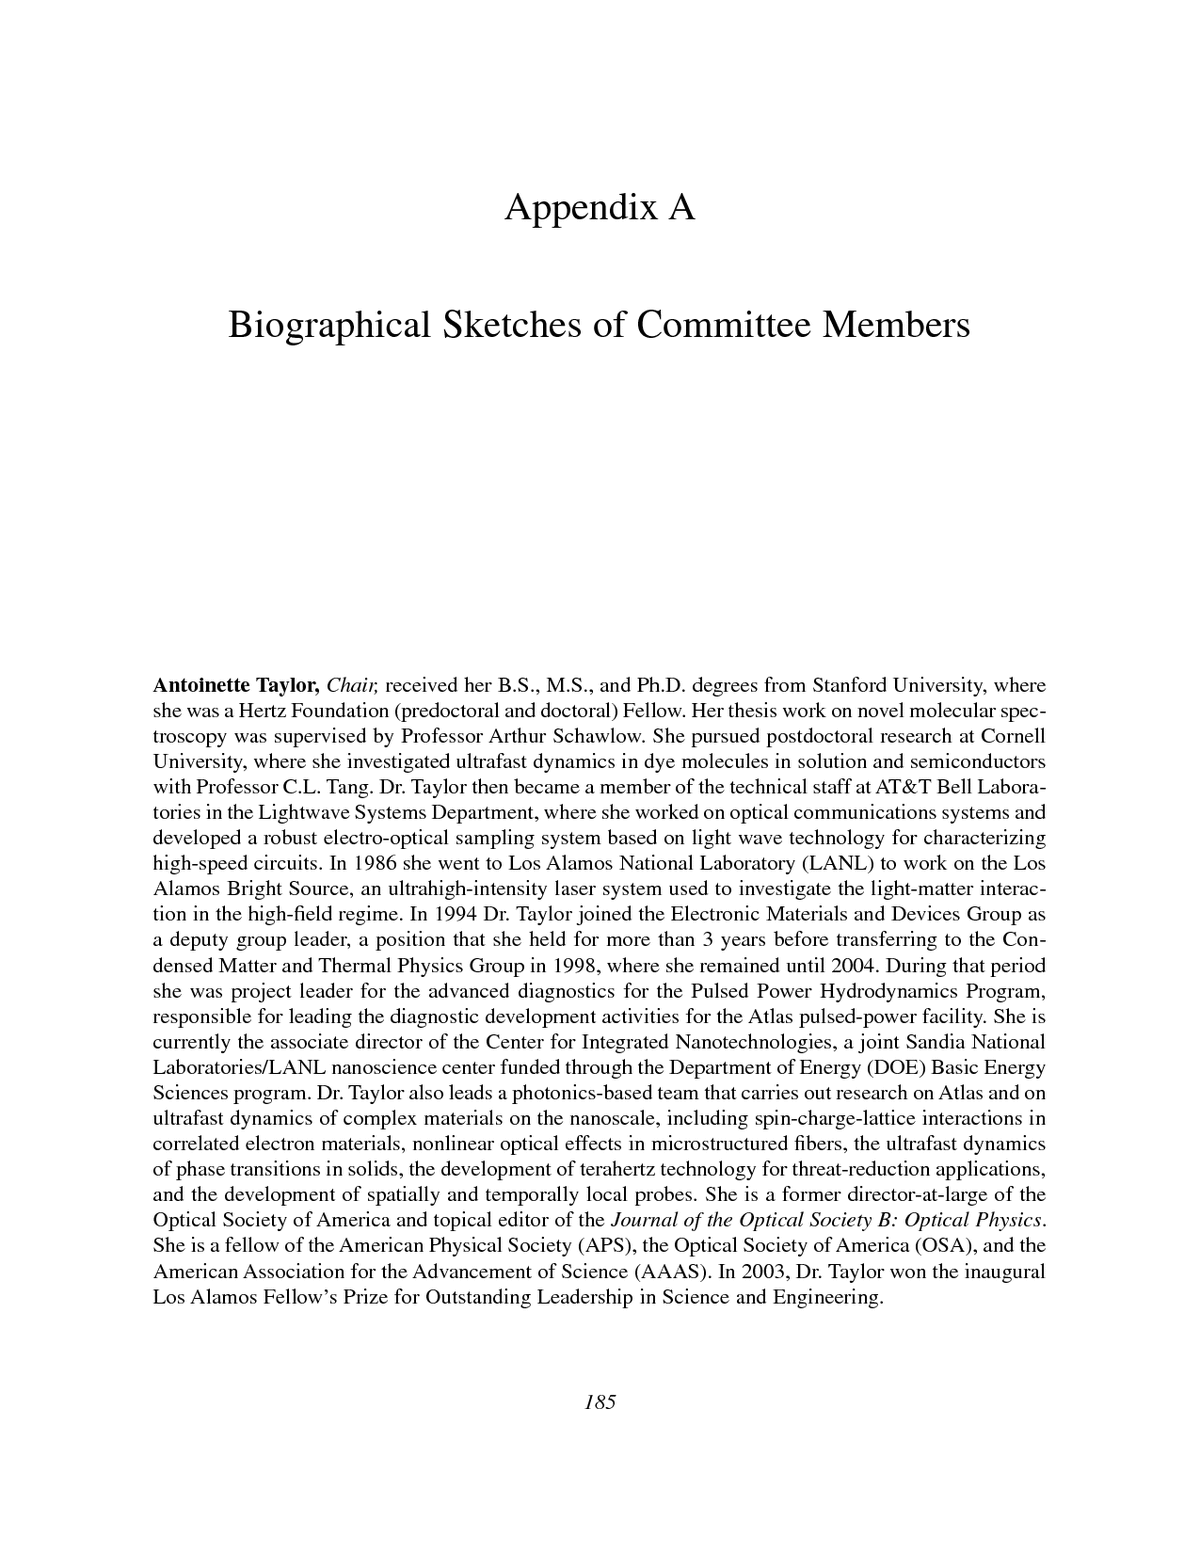 NIH Biographical Sketch and Other Support | Research and Economic  Development